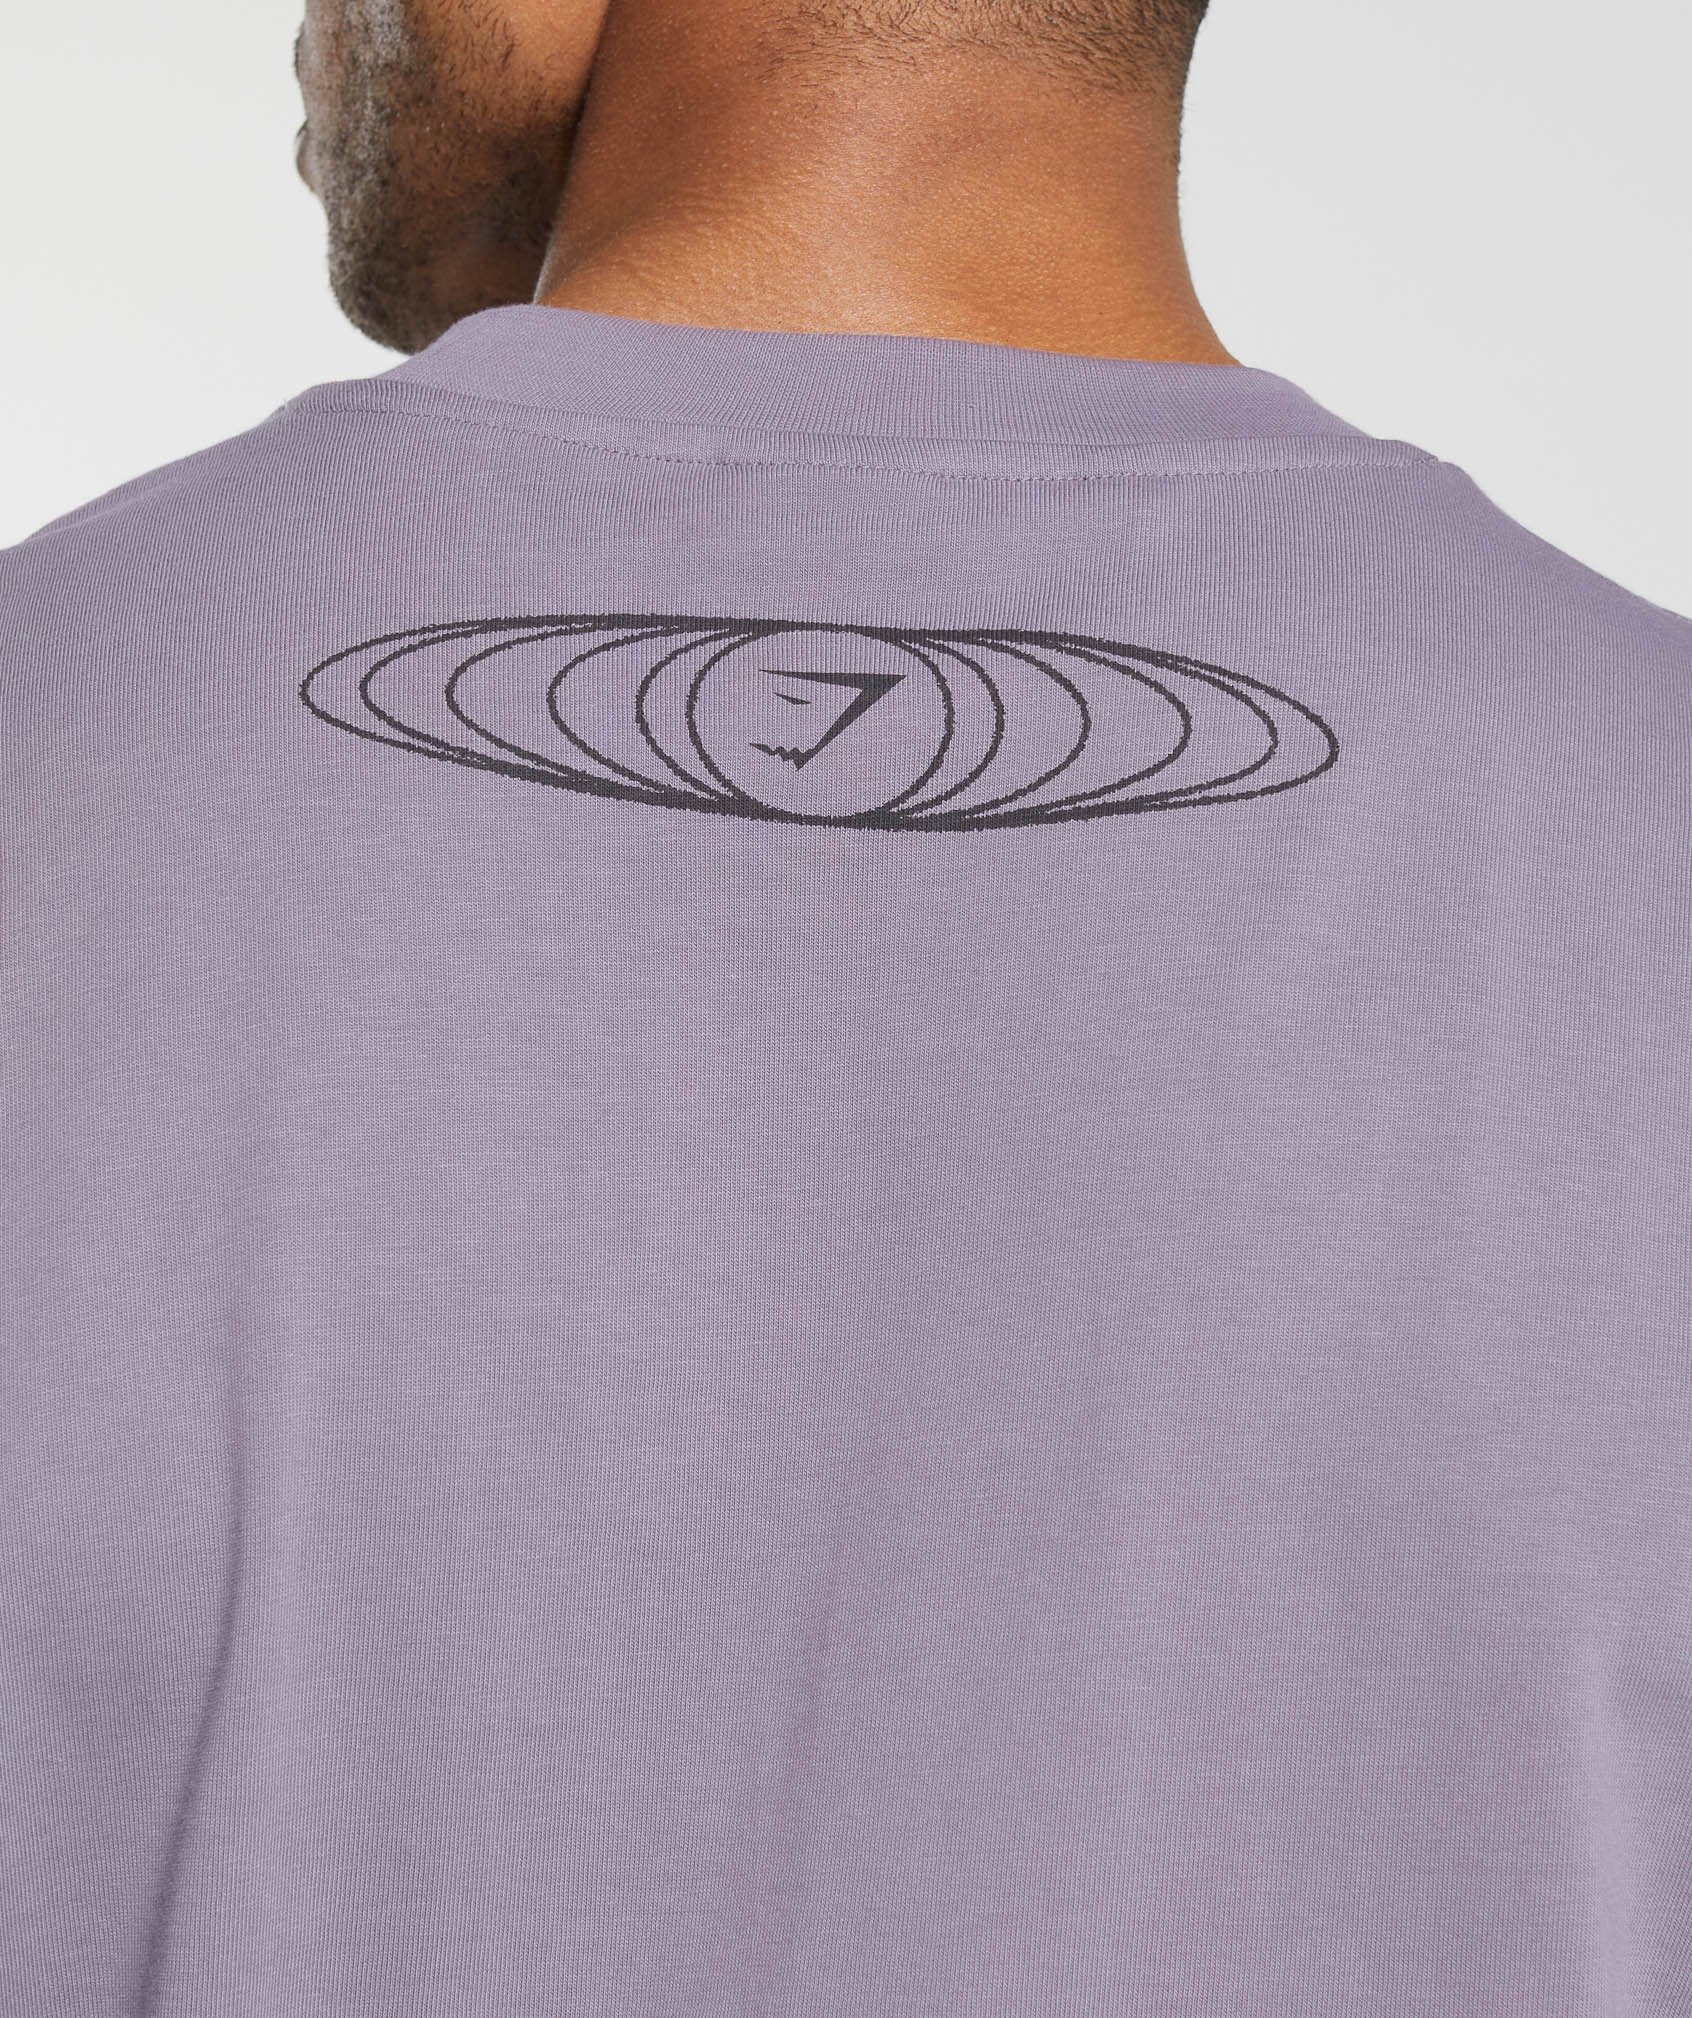 Masters of Our Craft Long Sleeve T-Shirt in Fog Purple - view 6